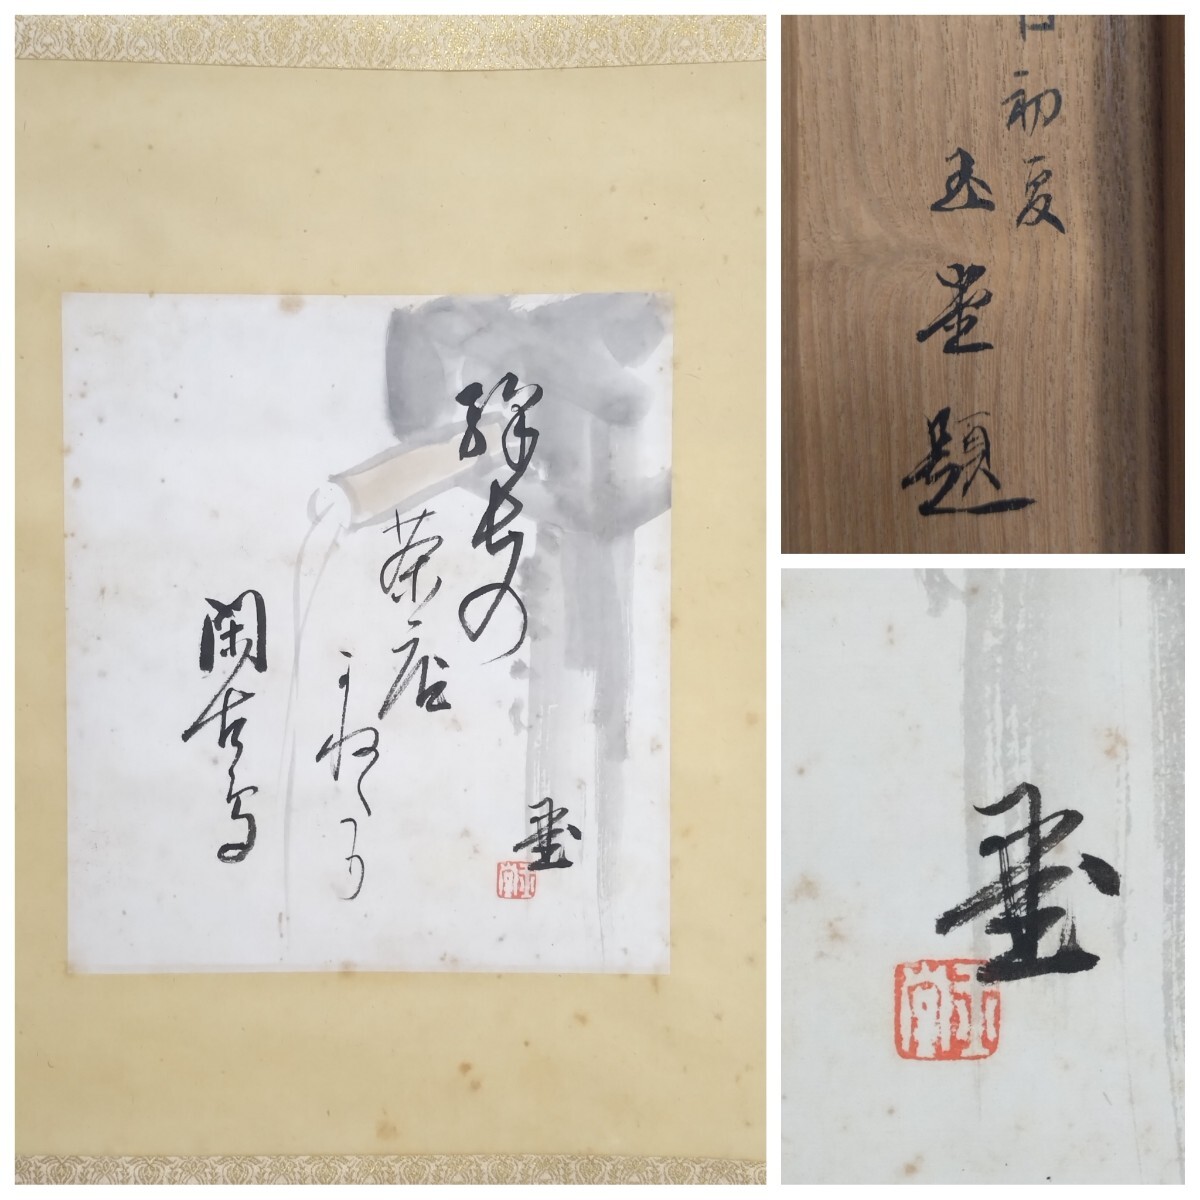 ▲Guaranteed authenticity, same box▲Imperial Artist [Kawai Gyokudo] Water Song paperback colored paper with stains ▲Japanese painting hanging scroll ▲Mounting height 122cm width 40cm work 27cm height 24cm ▲Japan Art Institute Issue 100, painting, Japanese painting, landscape, Fugetsu